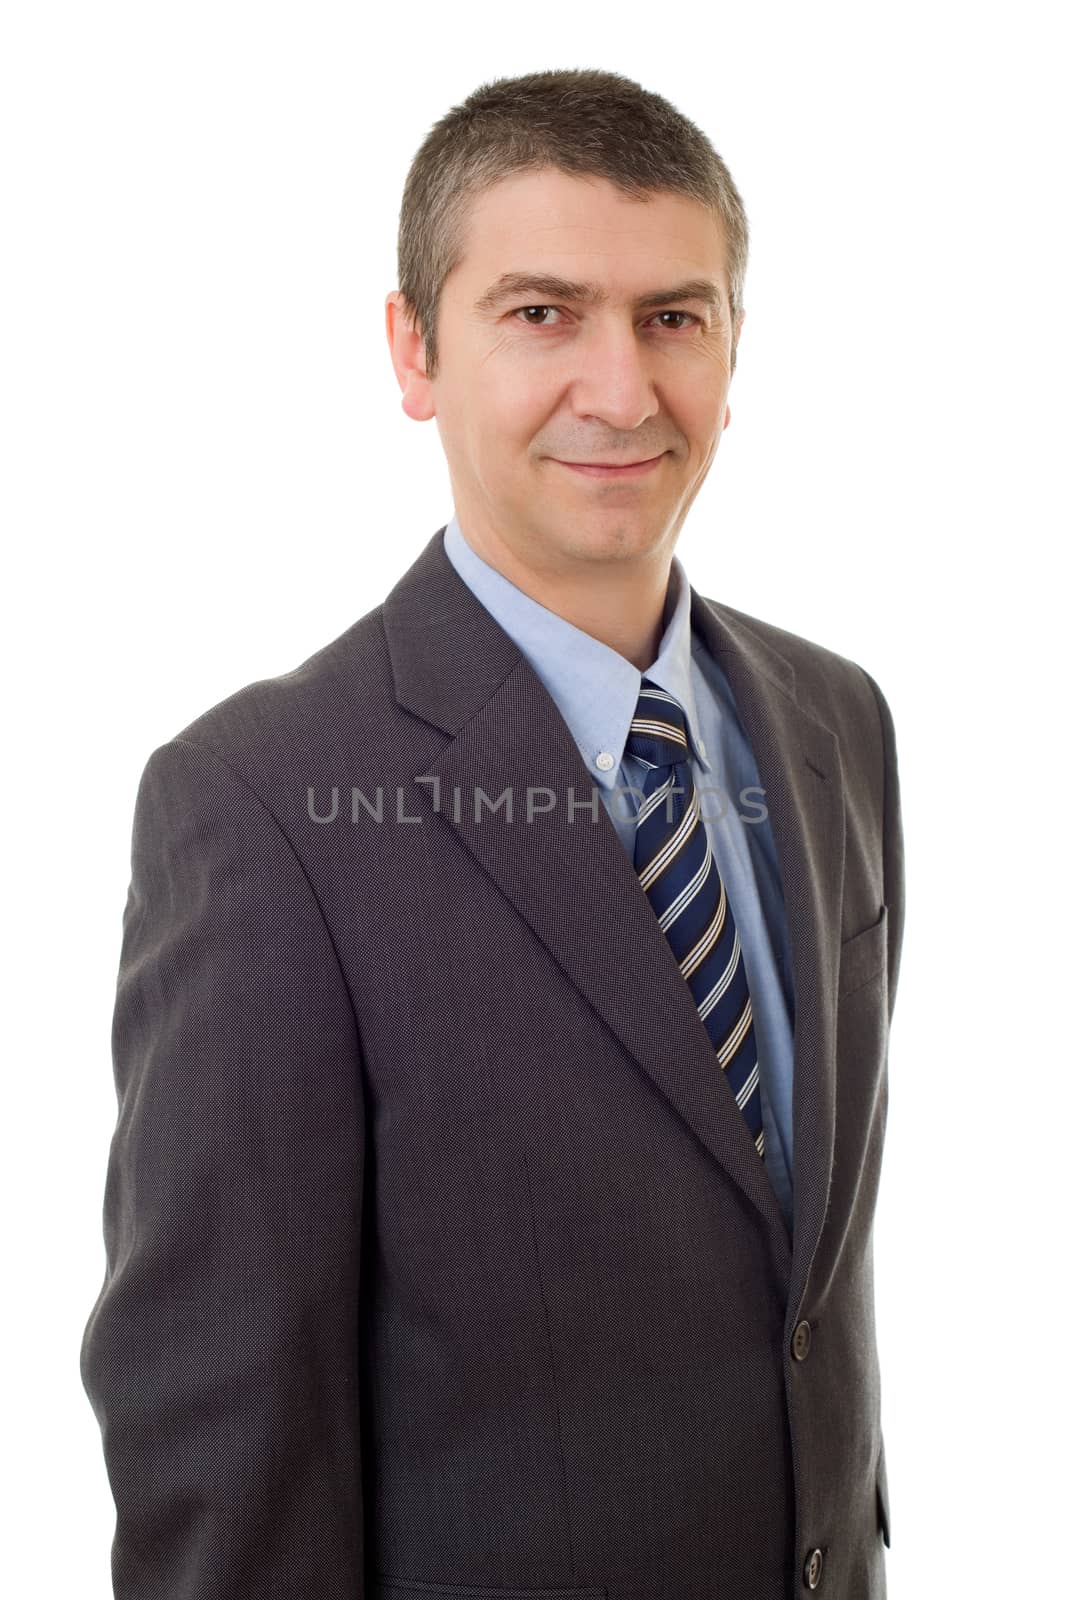 happy business man portrait isolated on white